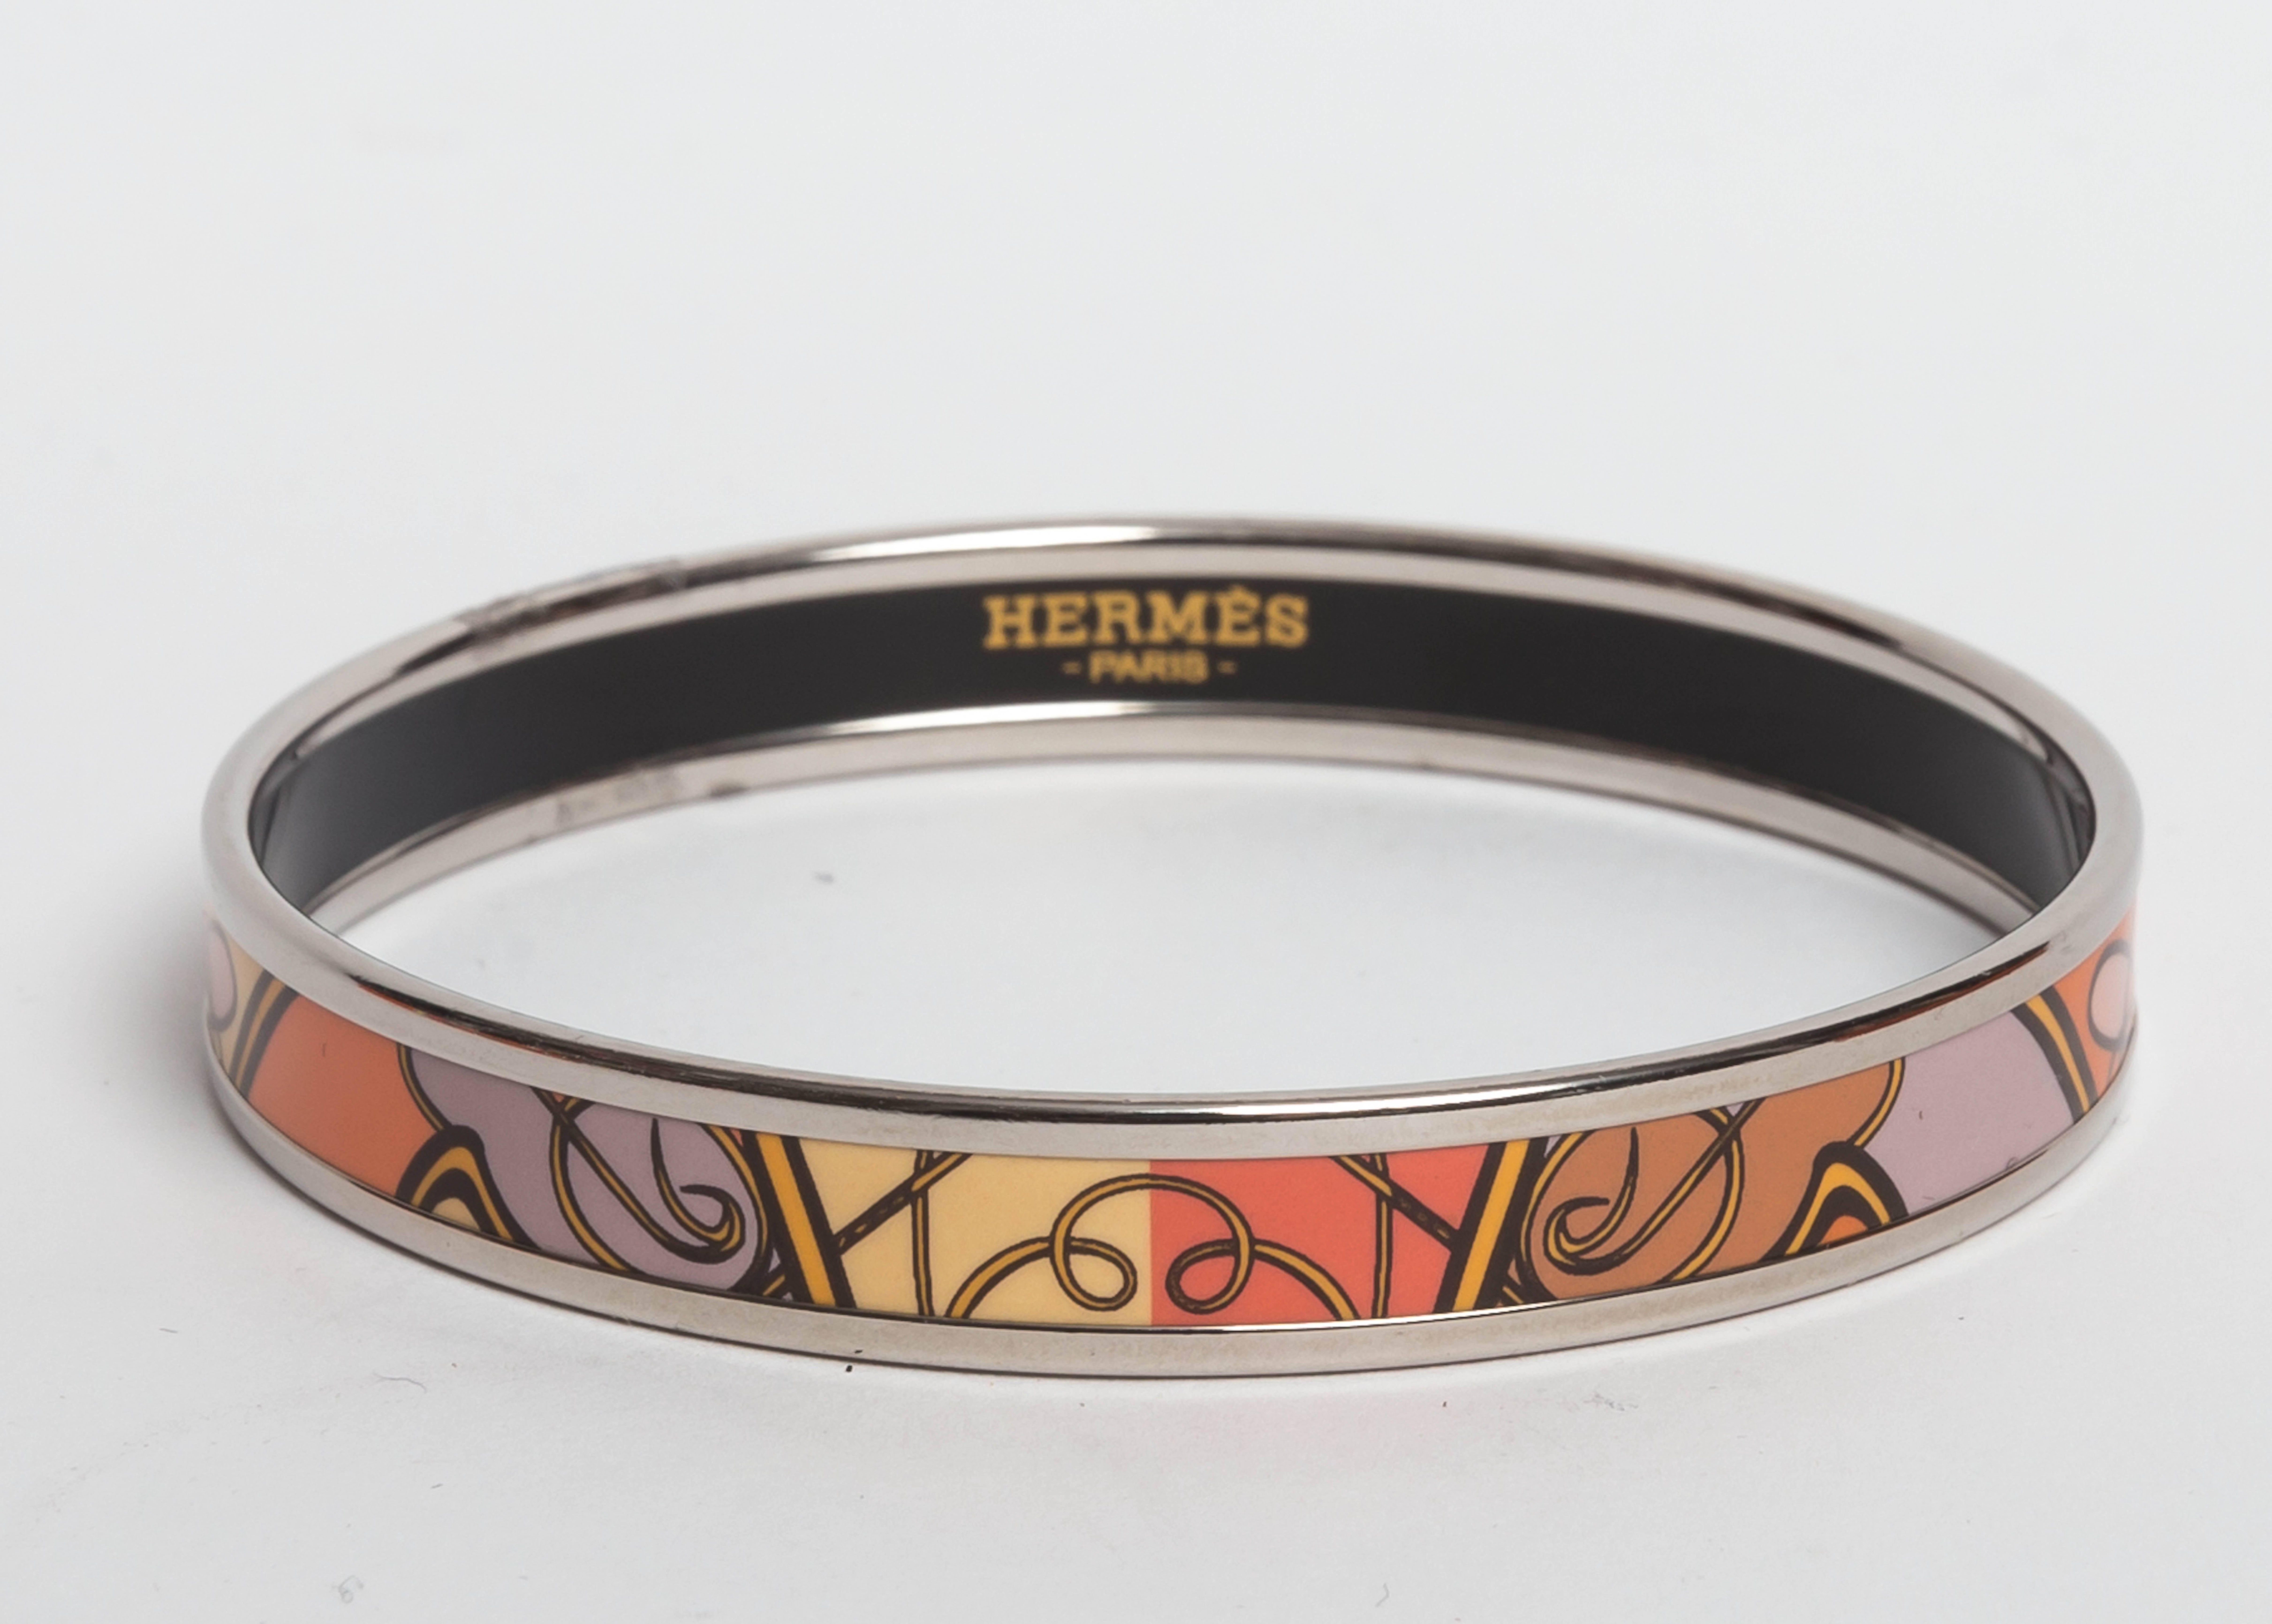 Lovely Hermes bangle in a size small. Coral, lavender and orange colors in a geometric design make this 1 cm wide bracelet quite eye catching.
Condition is perfect.
